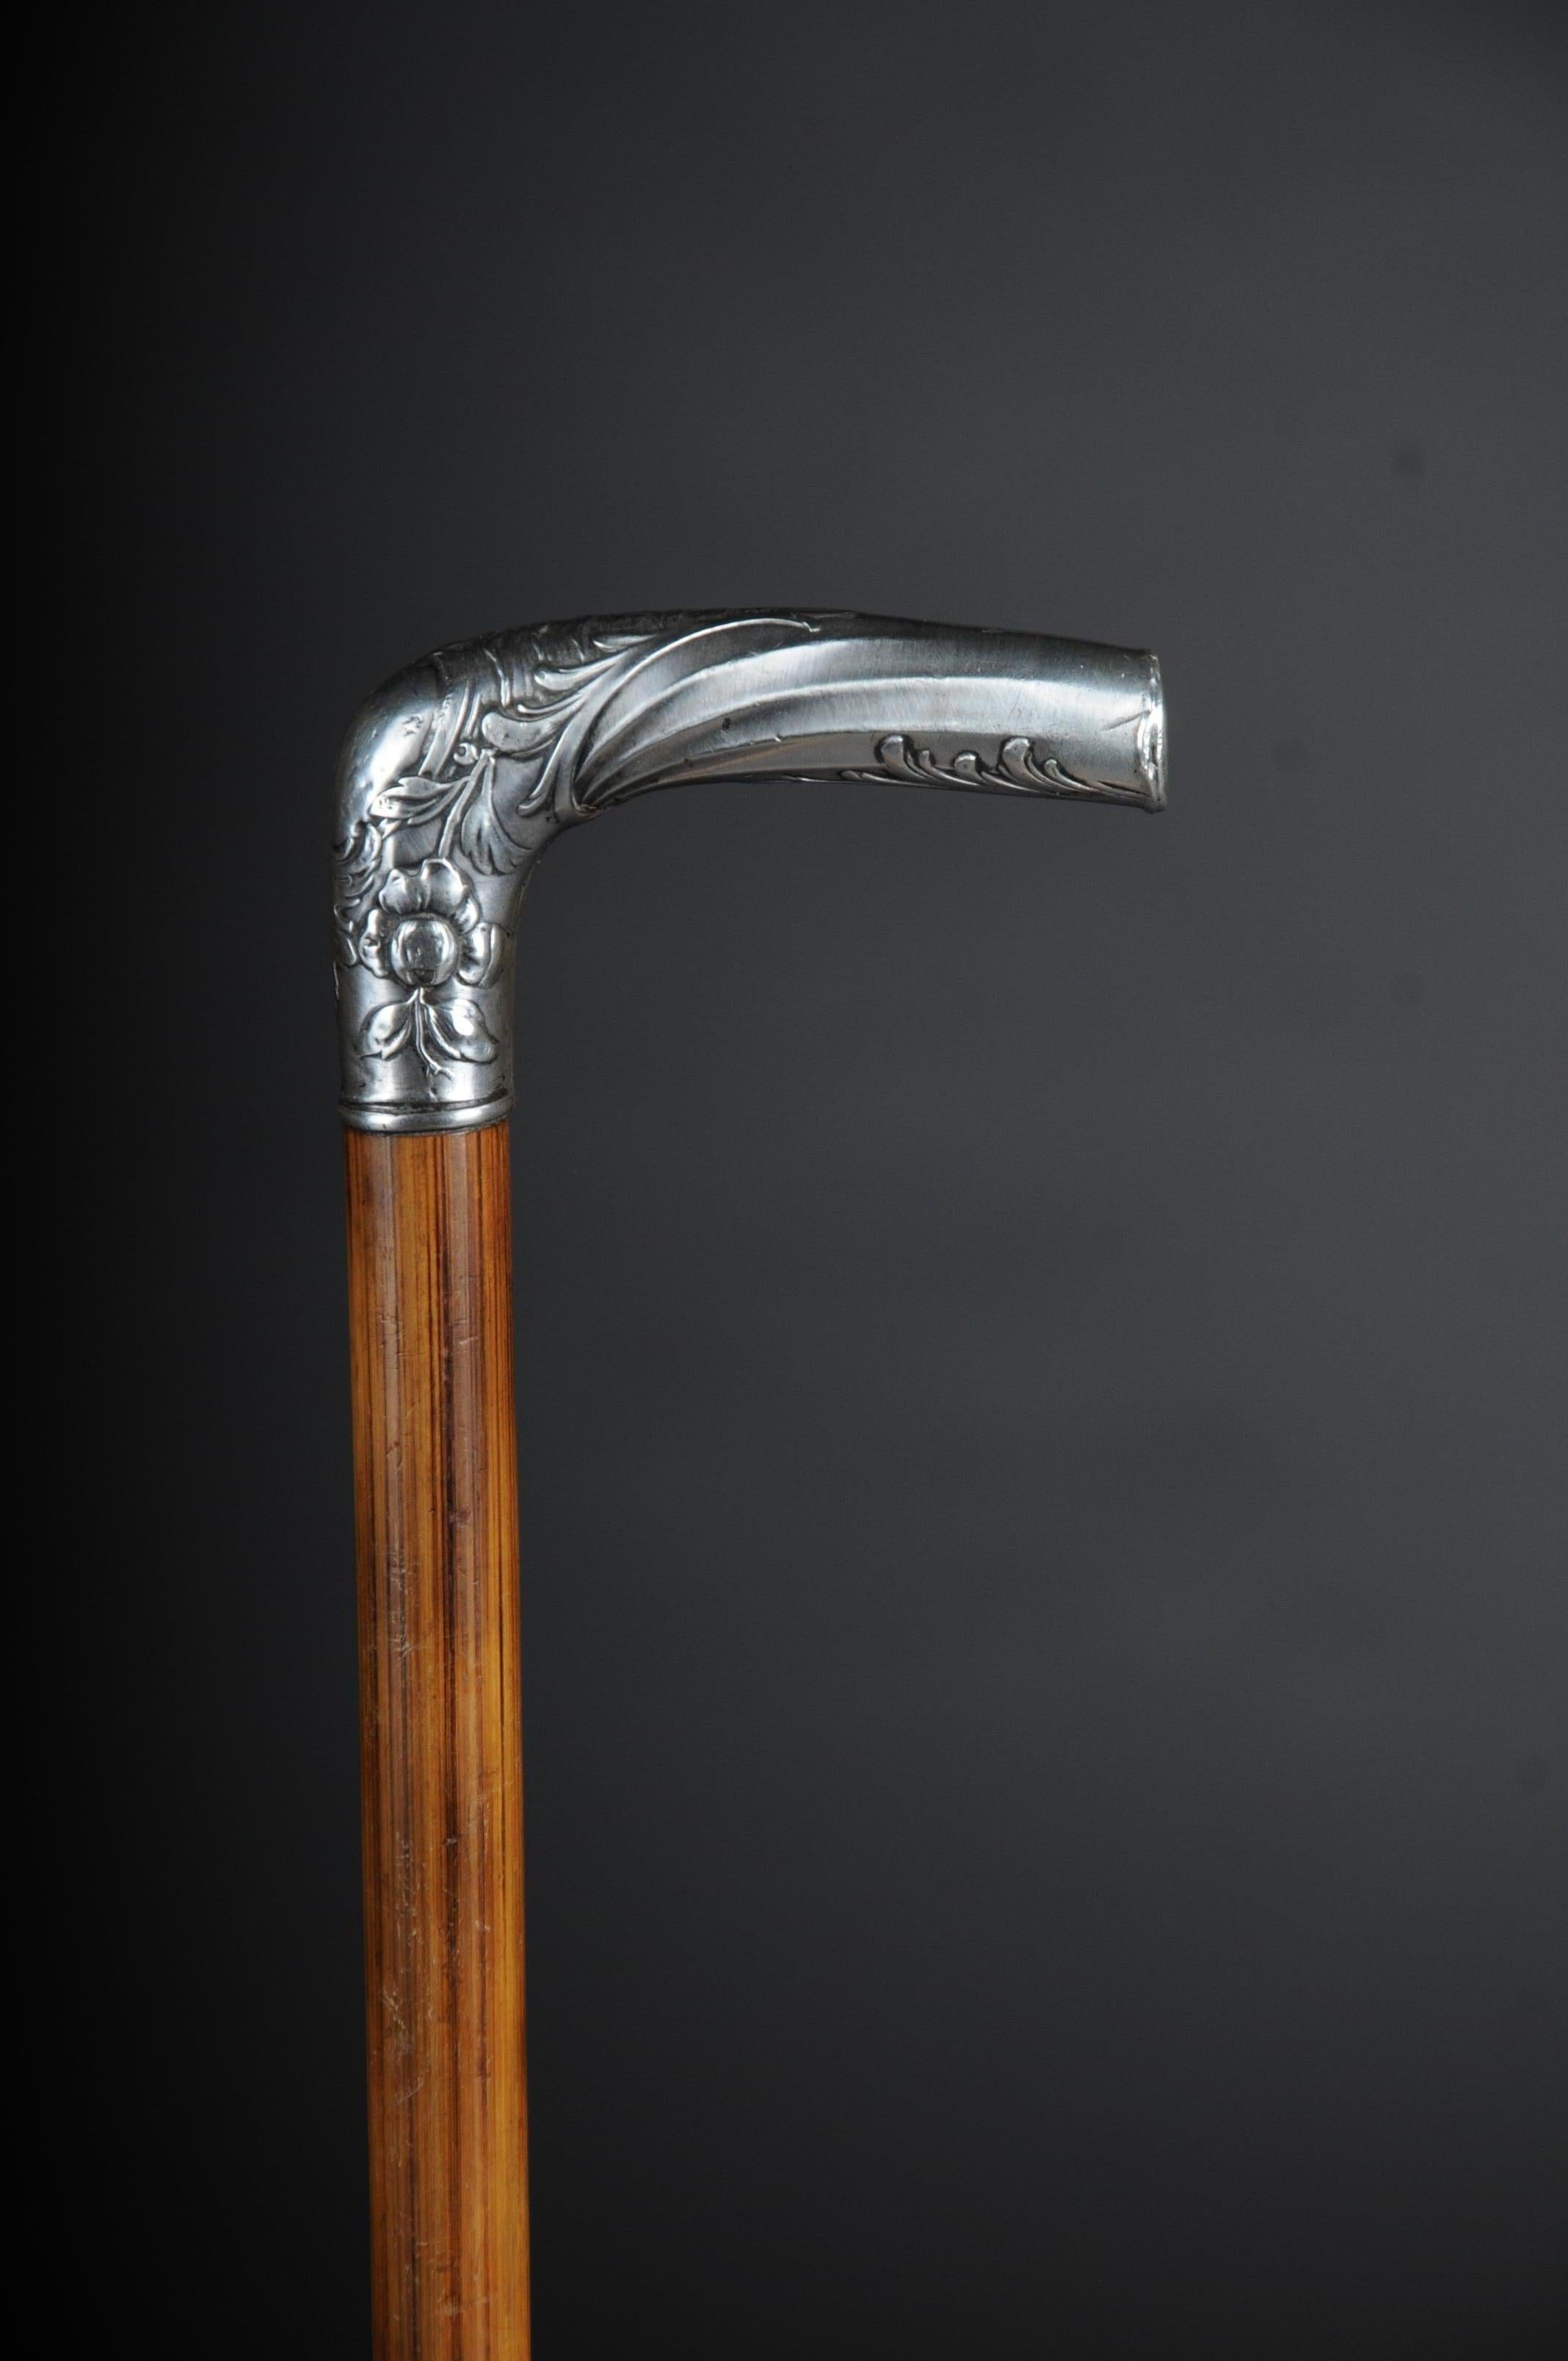 Art Nouveau walking stick silver handle around 1910
floral silver handle in 800 silver
(V-218).